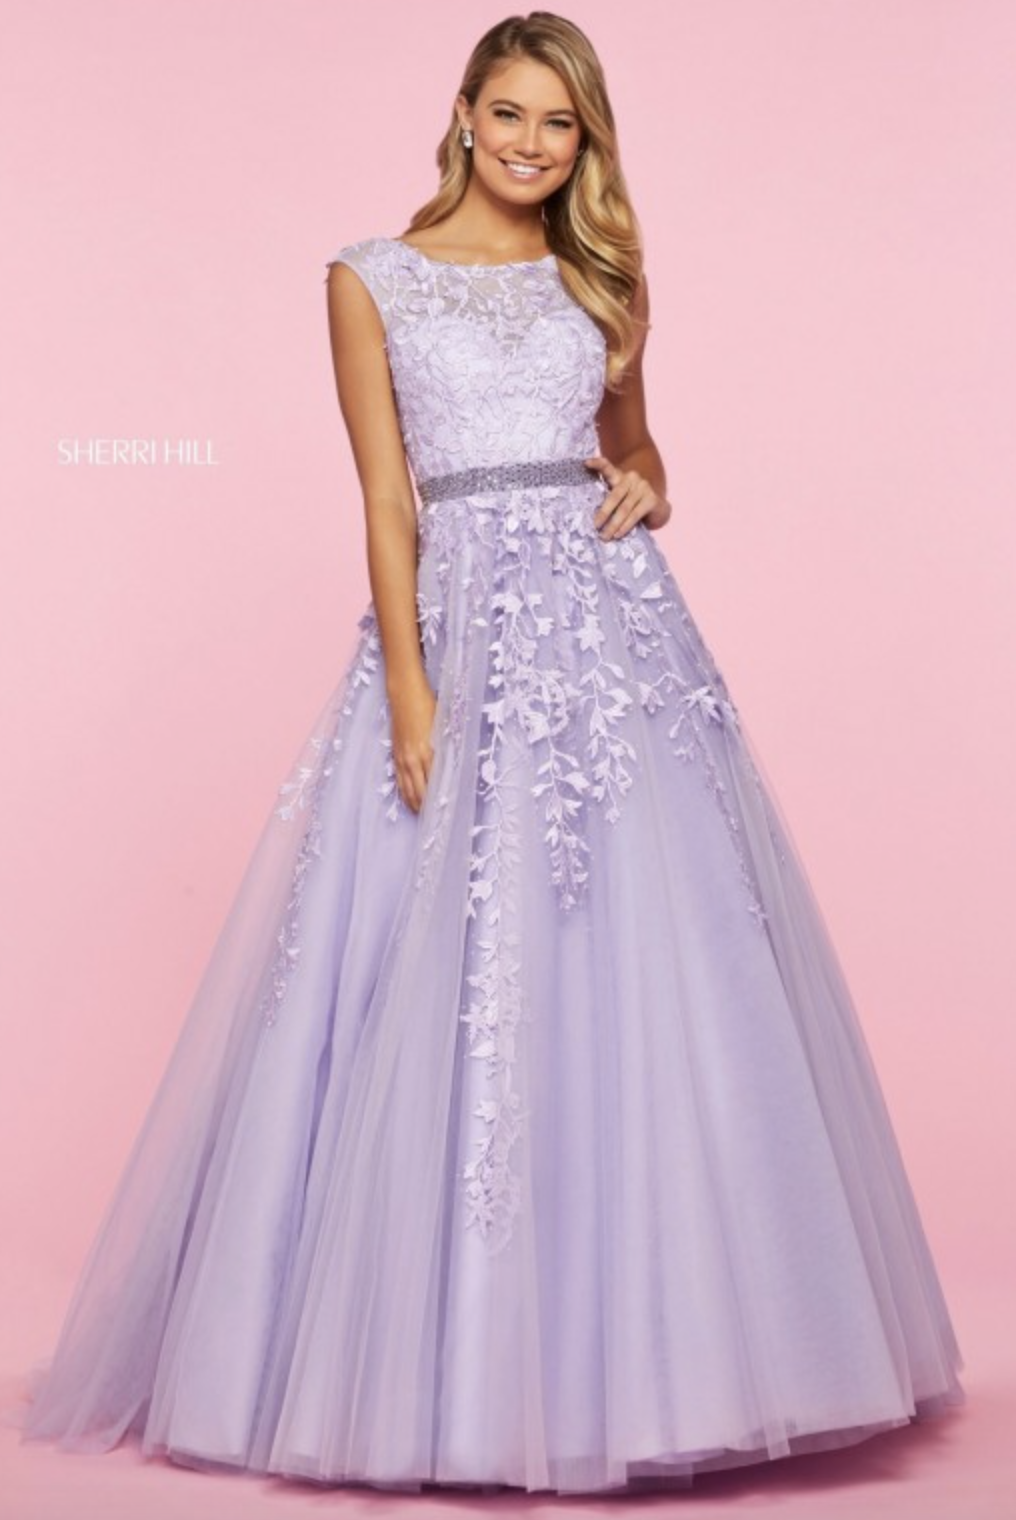 Top Modest Prom Dresses of 2021 -